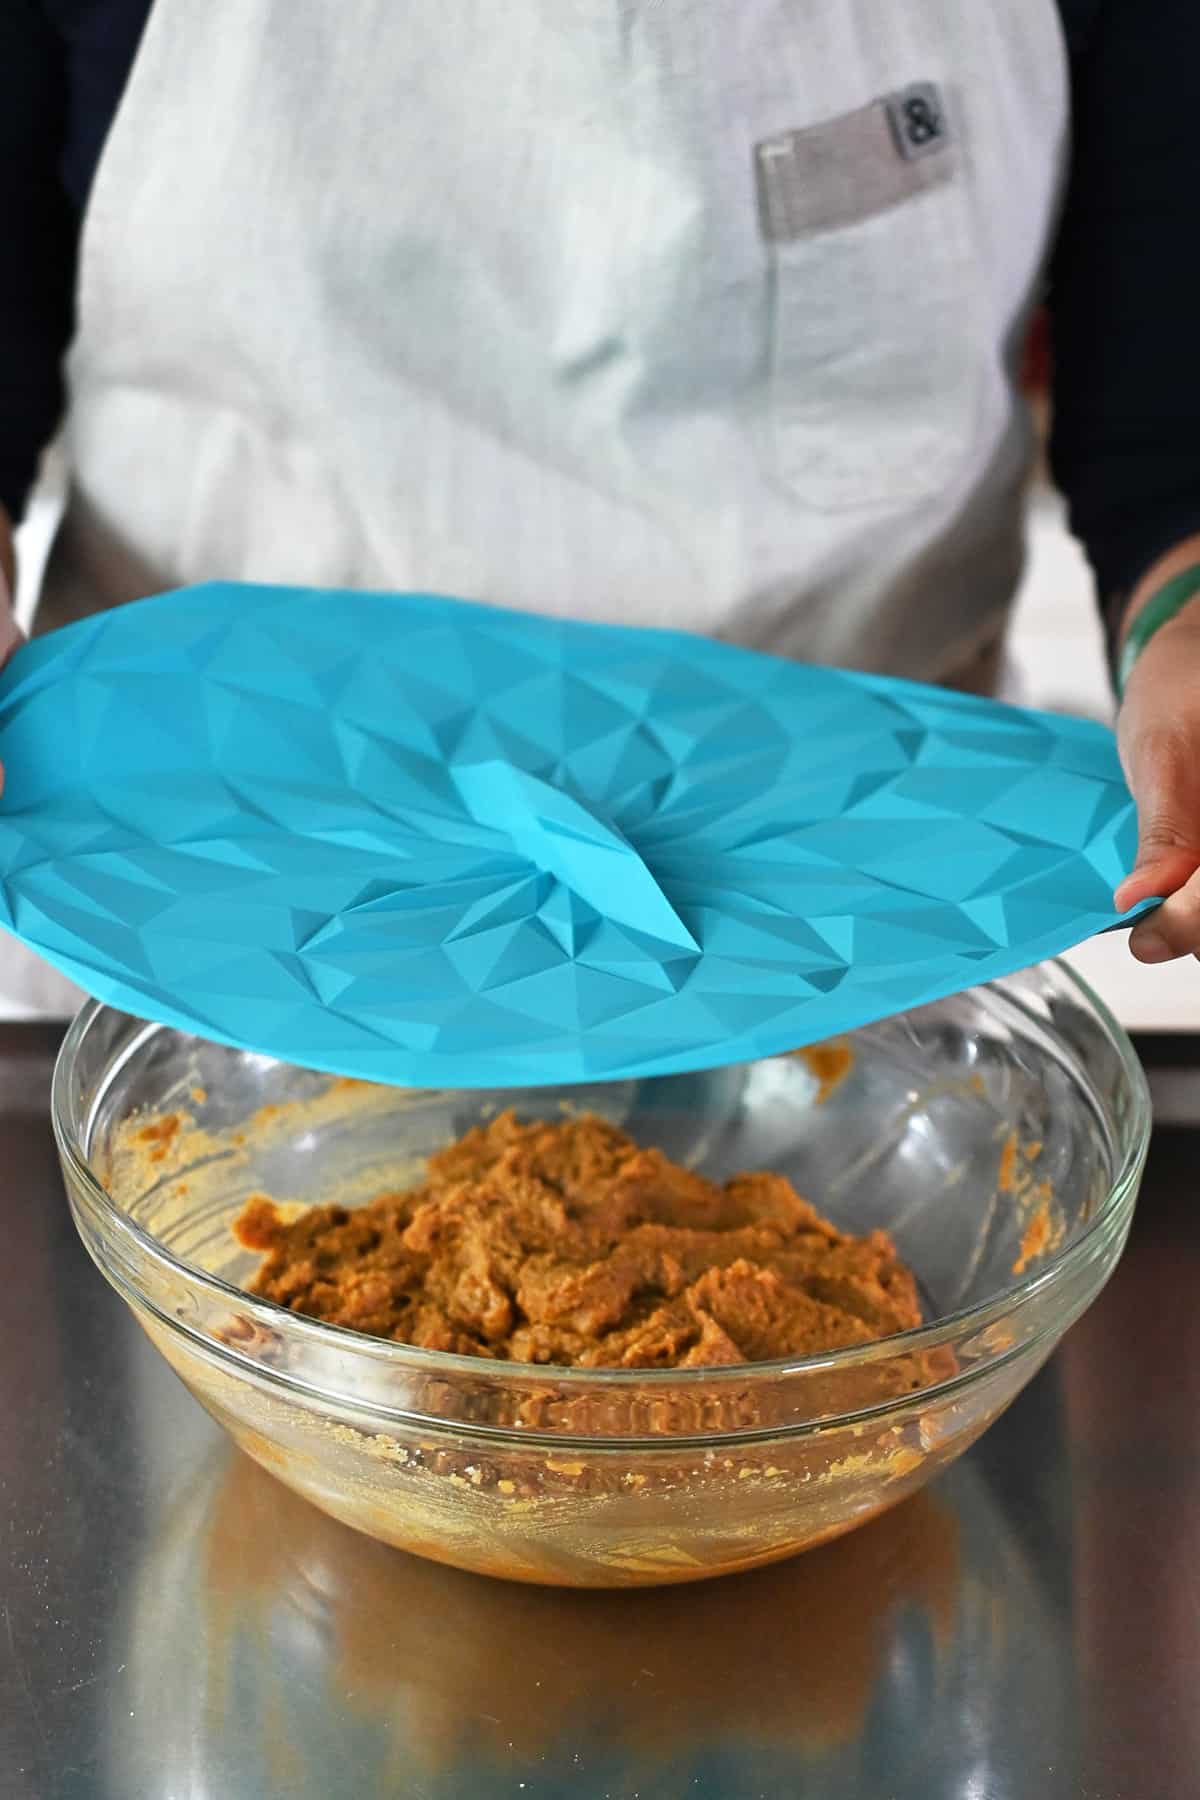 A person is placing a blue silicone lid on top of a bowl filled with uncooked paleo pumpkin cookie dough before chilling it in the fridge.